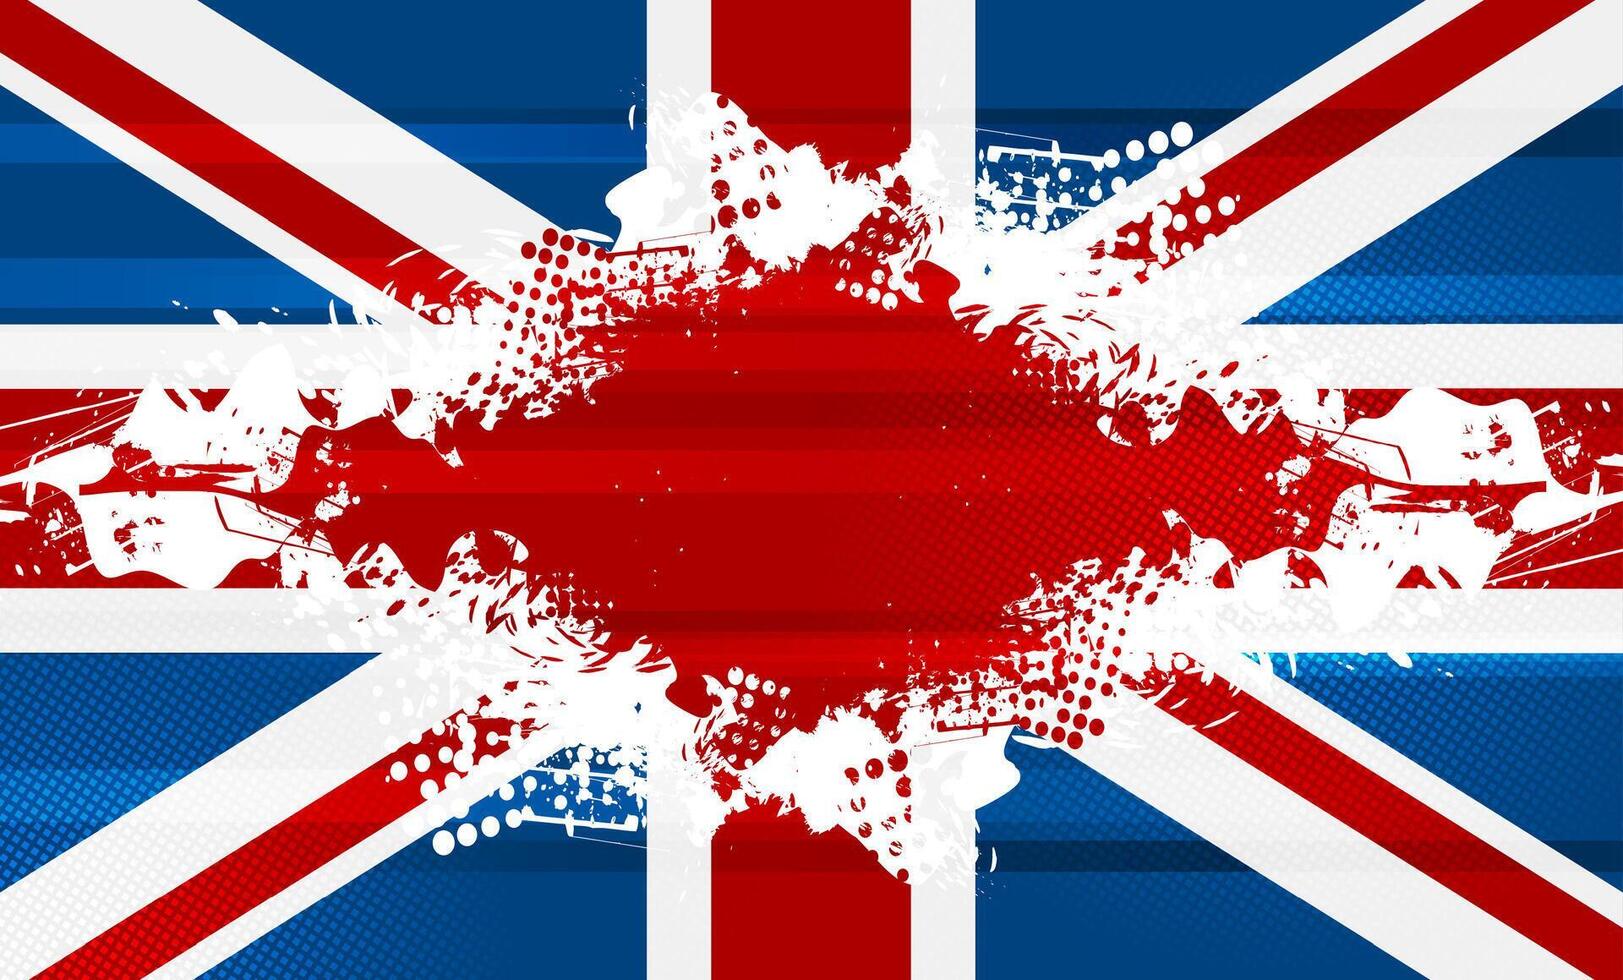 The United Kingdom of Great Britain and Northern Ireland grunge flag vector